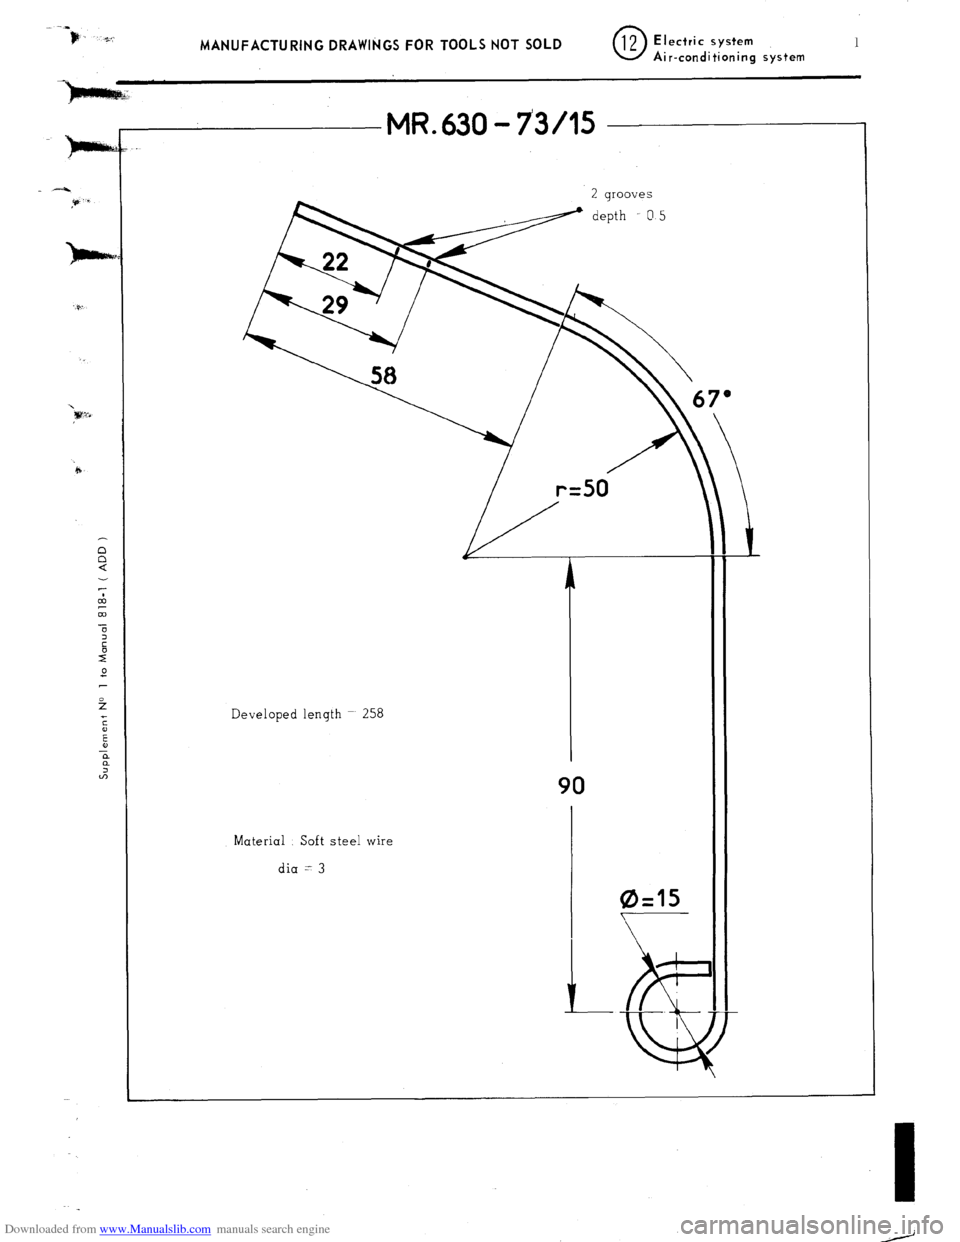 Citroen CX 1980 1.G Workshop Manual Downloaded from www.Manualslib.com manuals search engine MANUFACTURING DRAWINGS FOR TOOLS NOT SOLD 0 12 Electric system 1 Air-conditioning system n 
n 
a 
MR. 630 - 7305 
Developed length ~ 258 
Mater